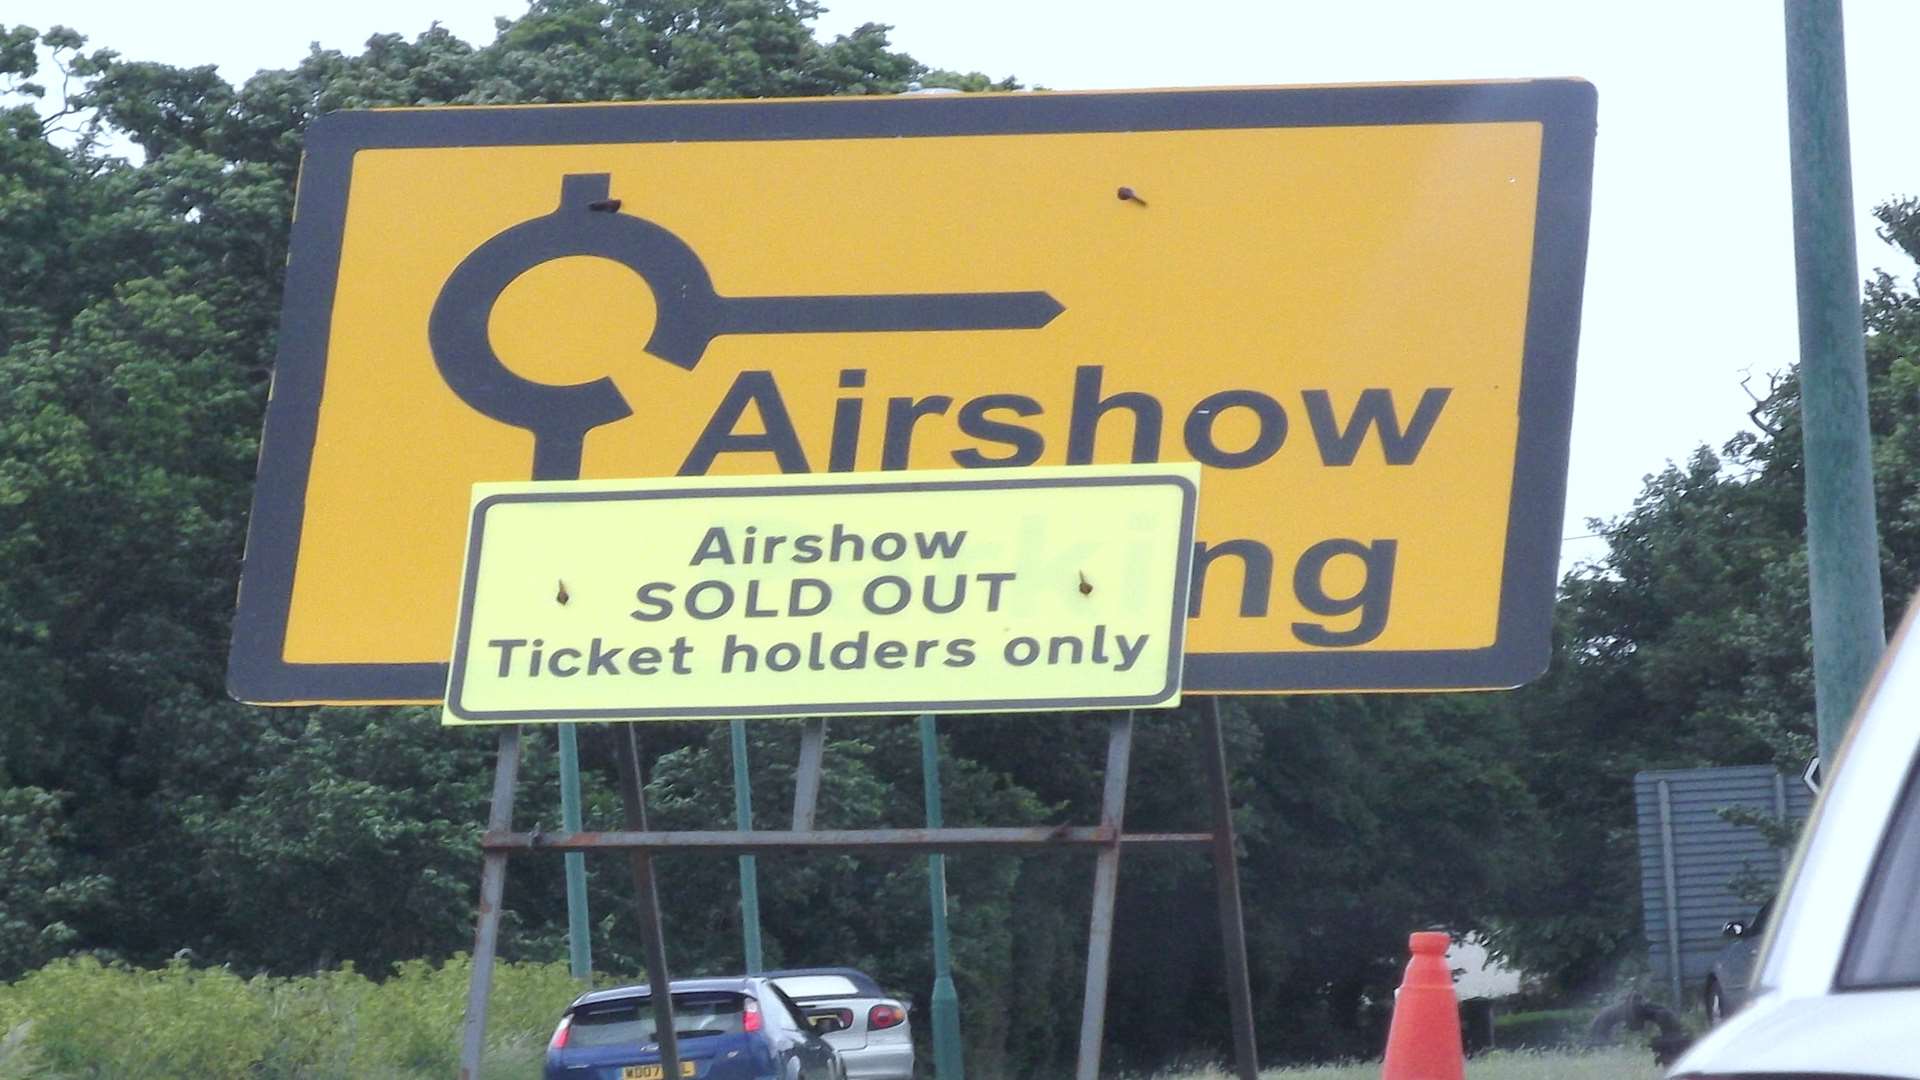 A sign explaining that the South East Airshow was sold out